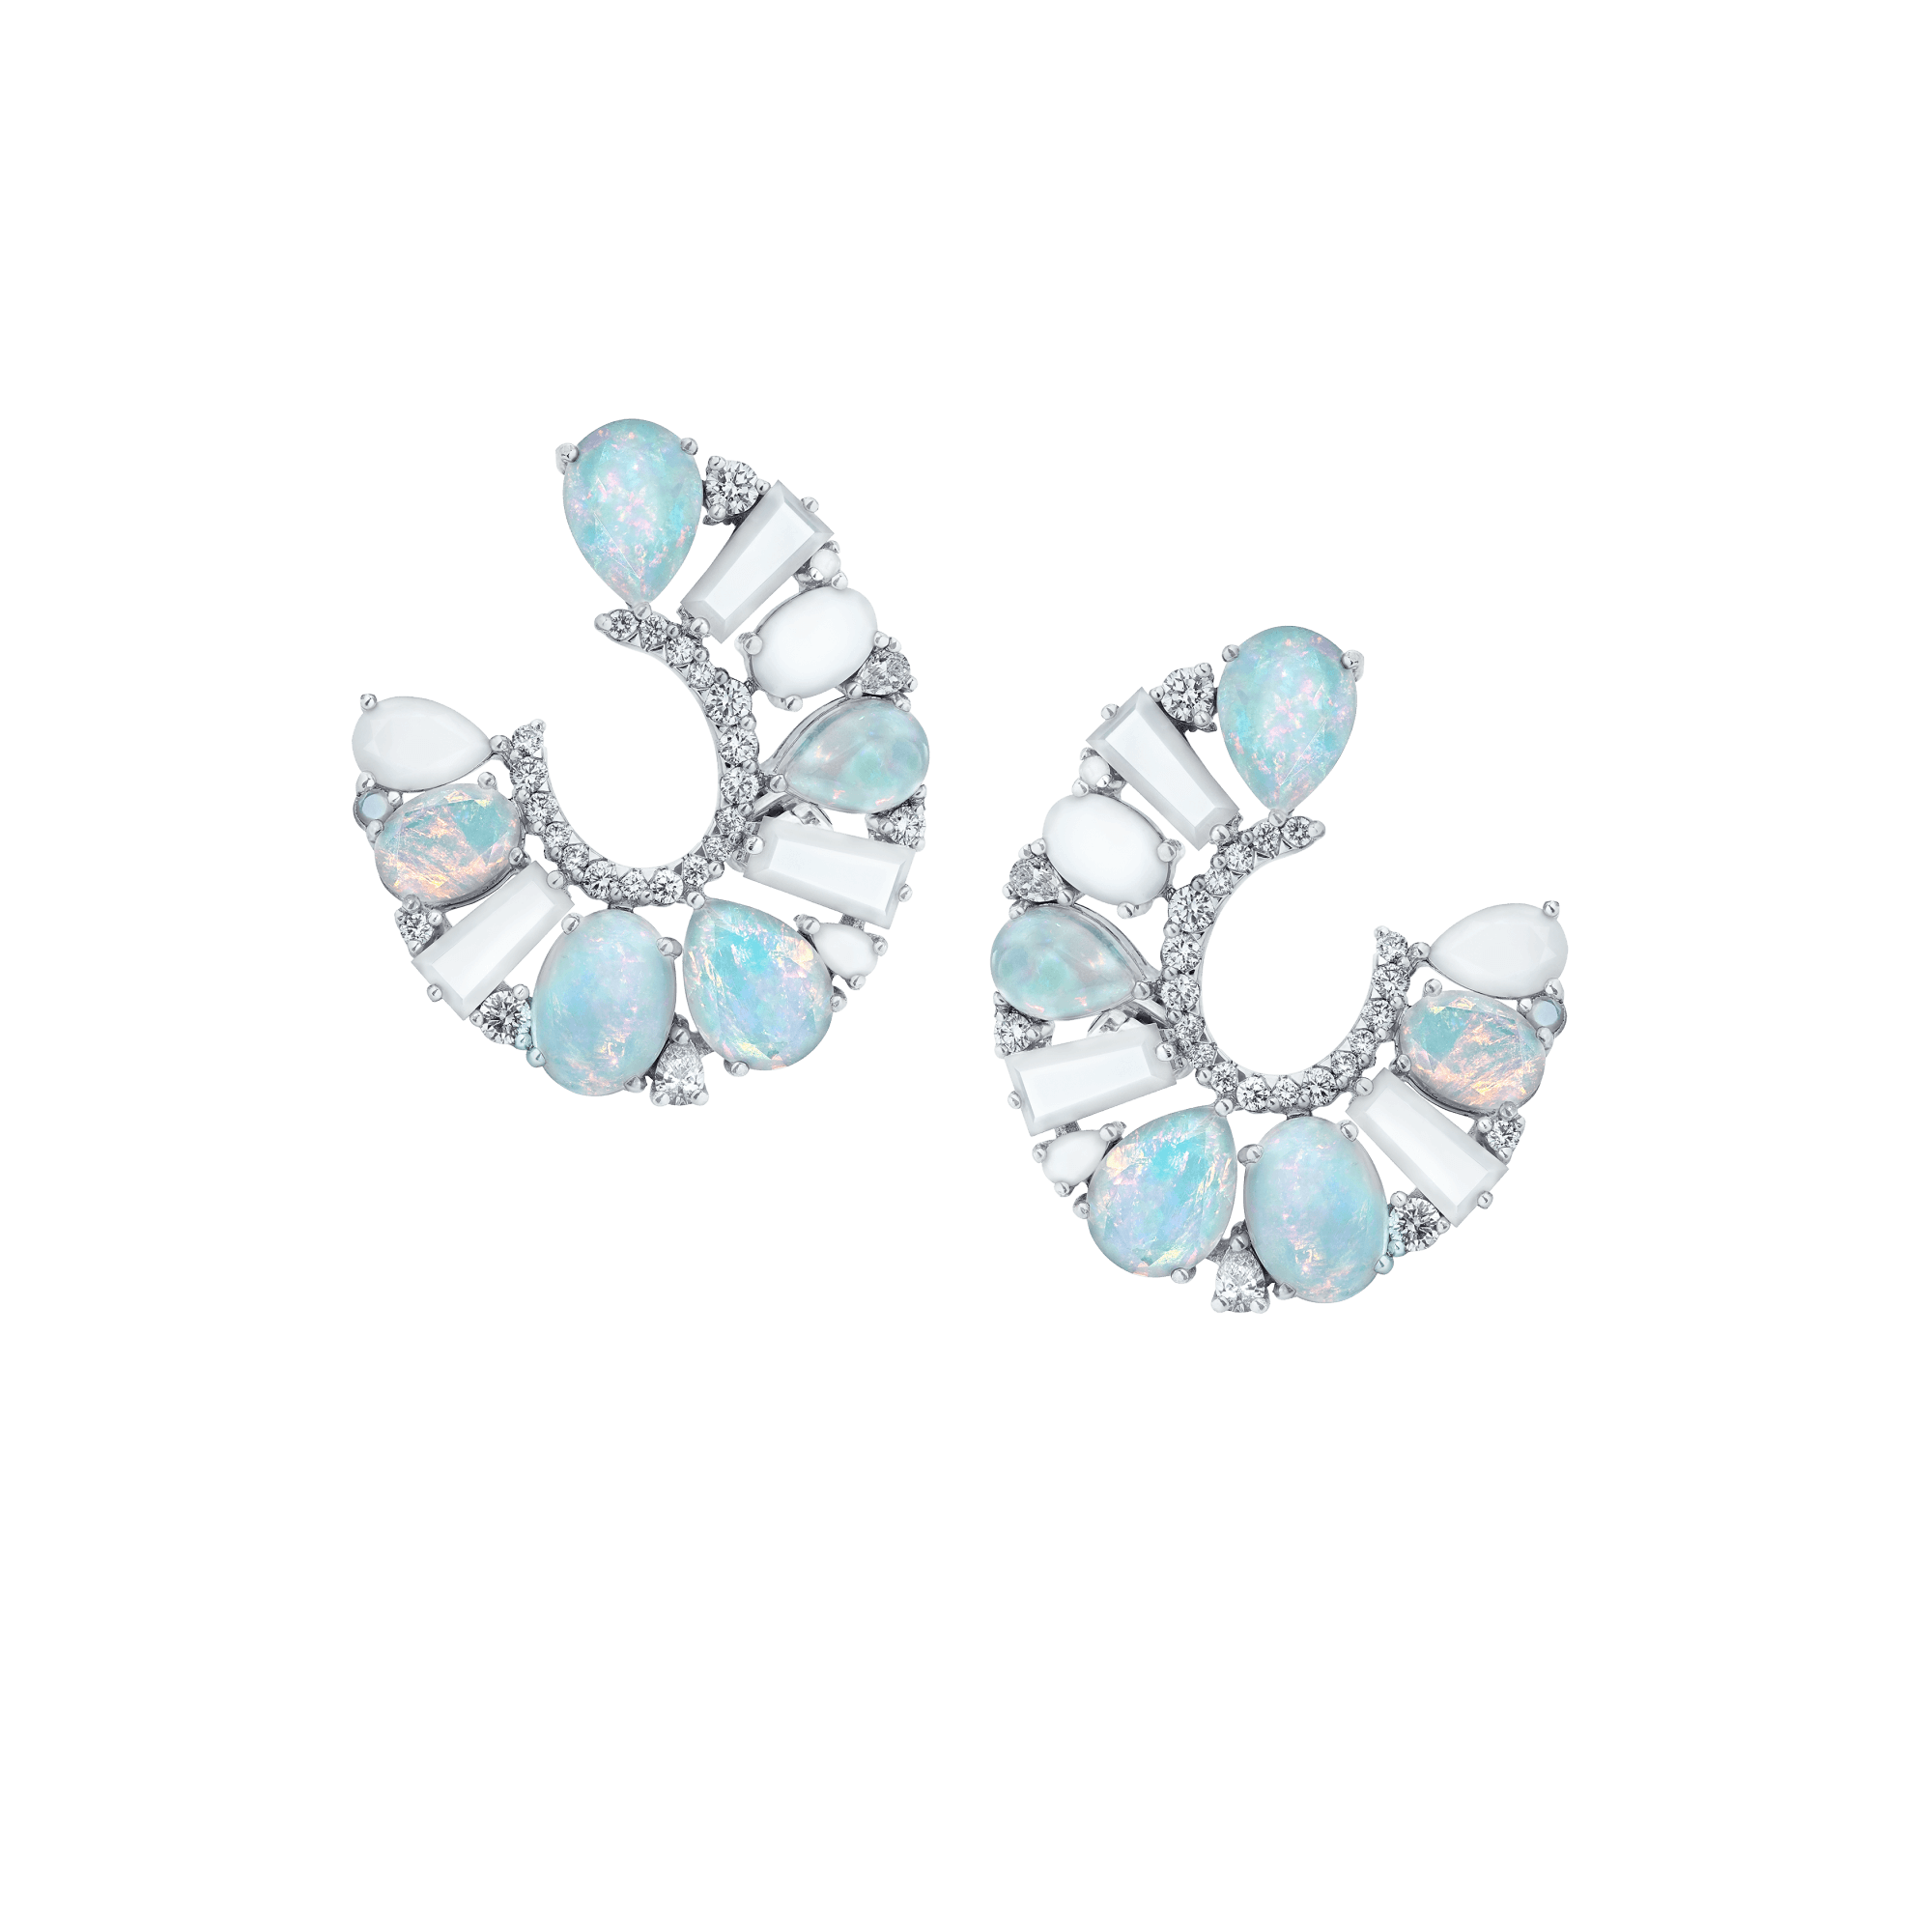 Garrard Blaze Collection 18ct white gold hoop earringwith white diamonds white opal white agate and white mother of pearl 2017664